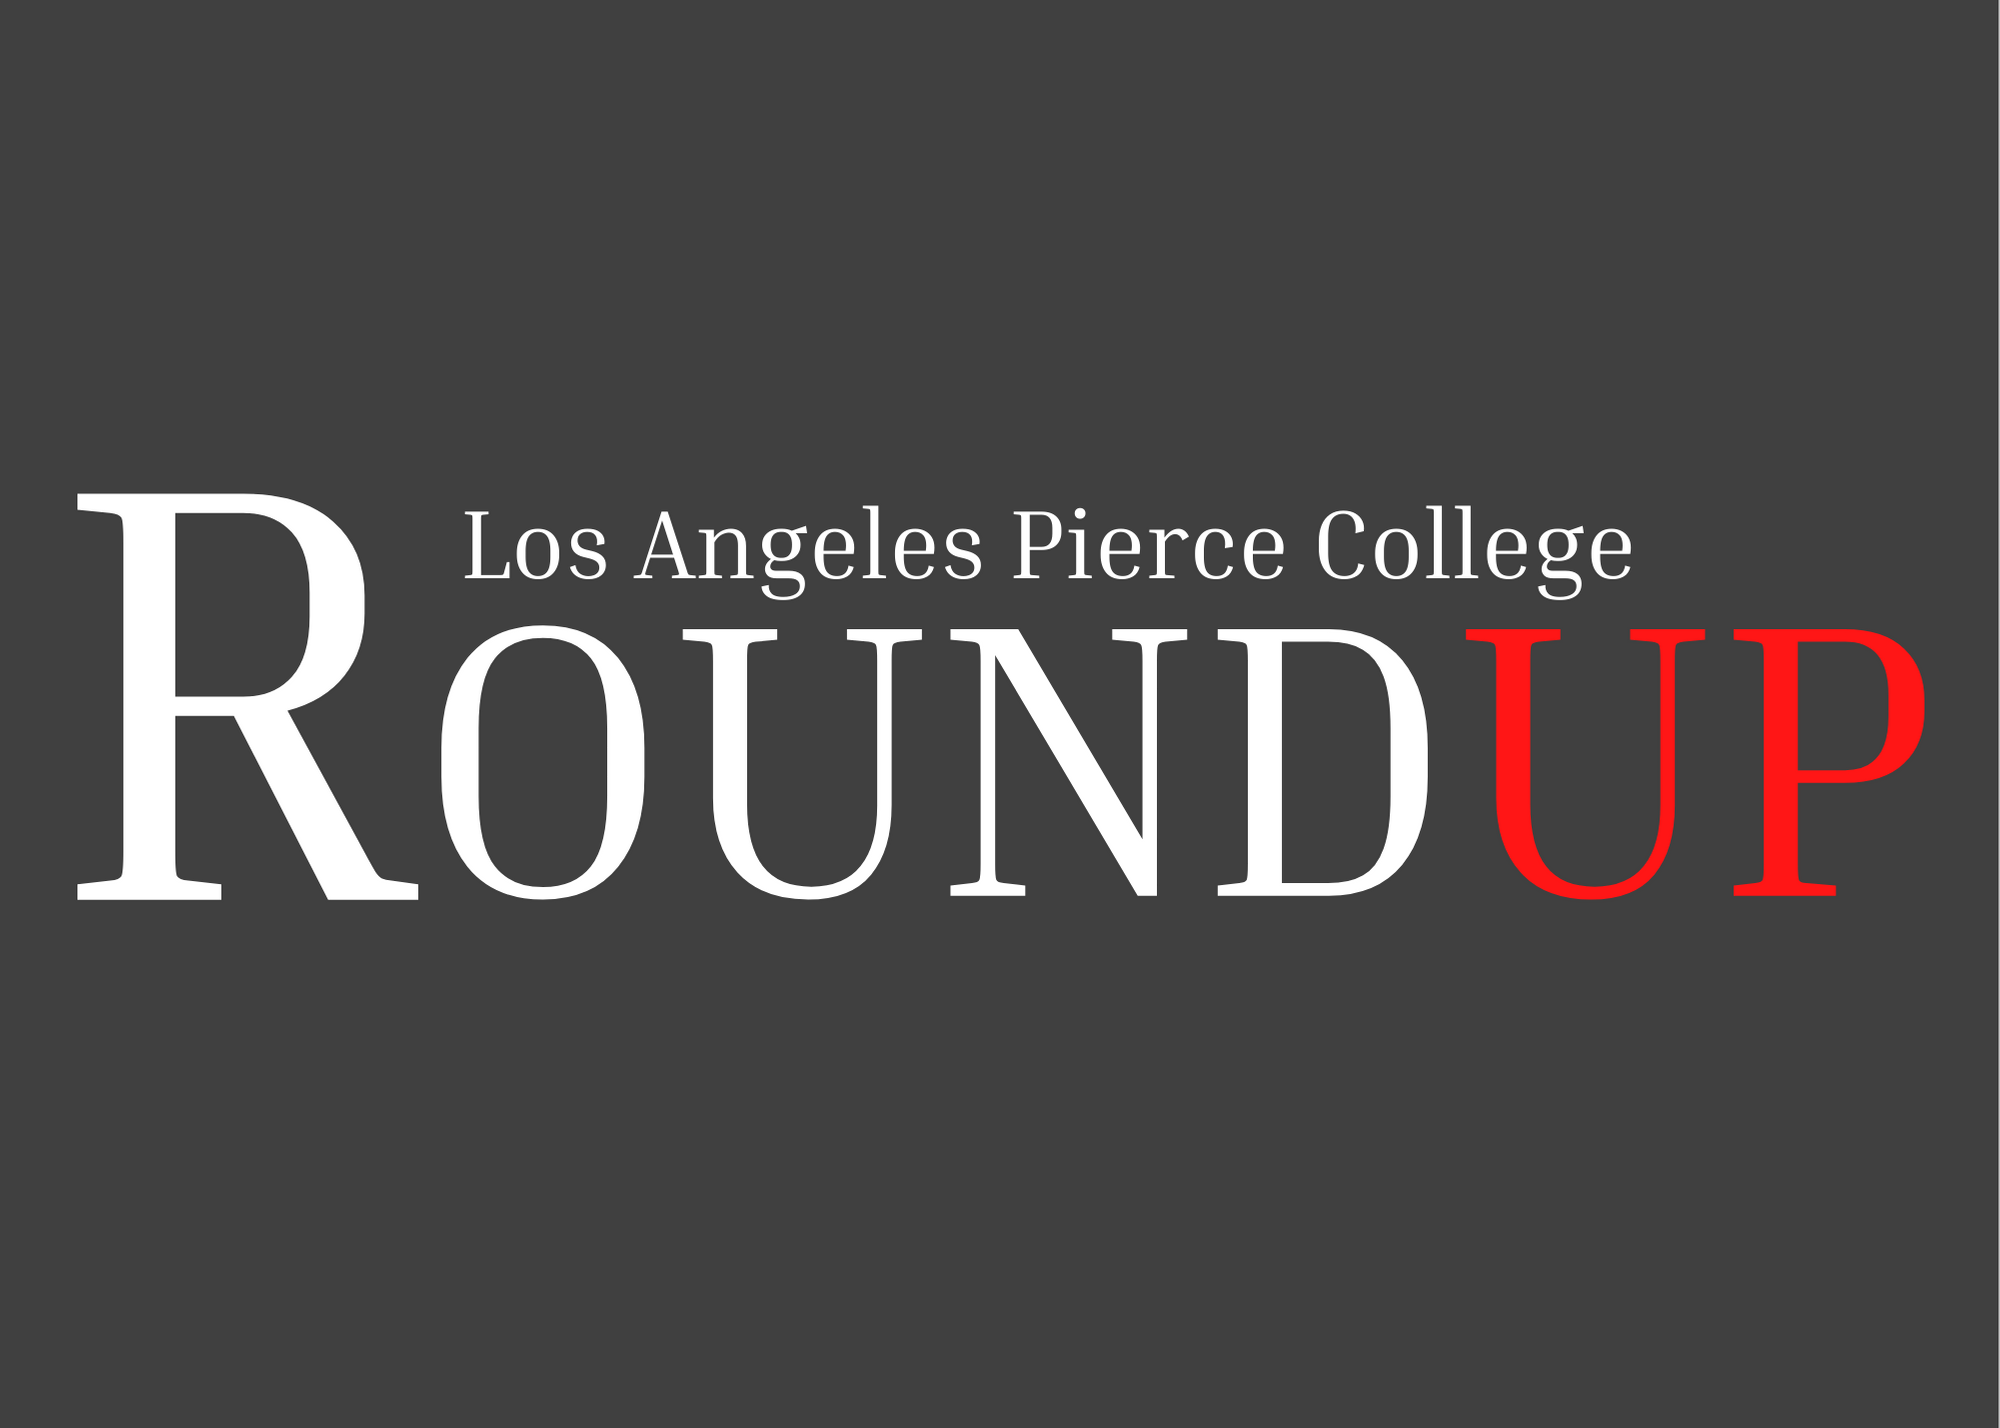 Pierce College offers express counseling